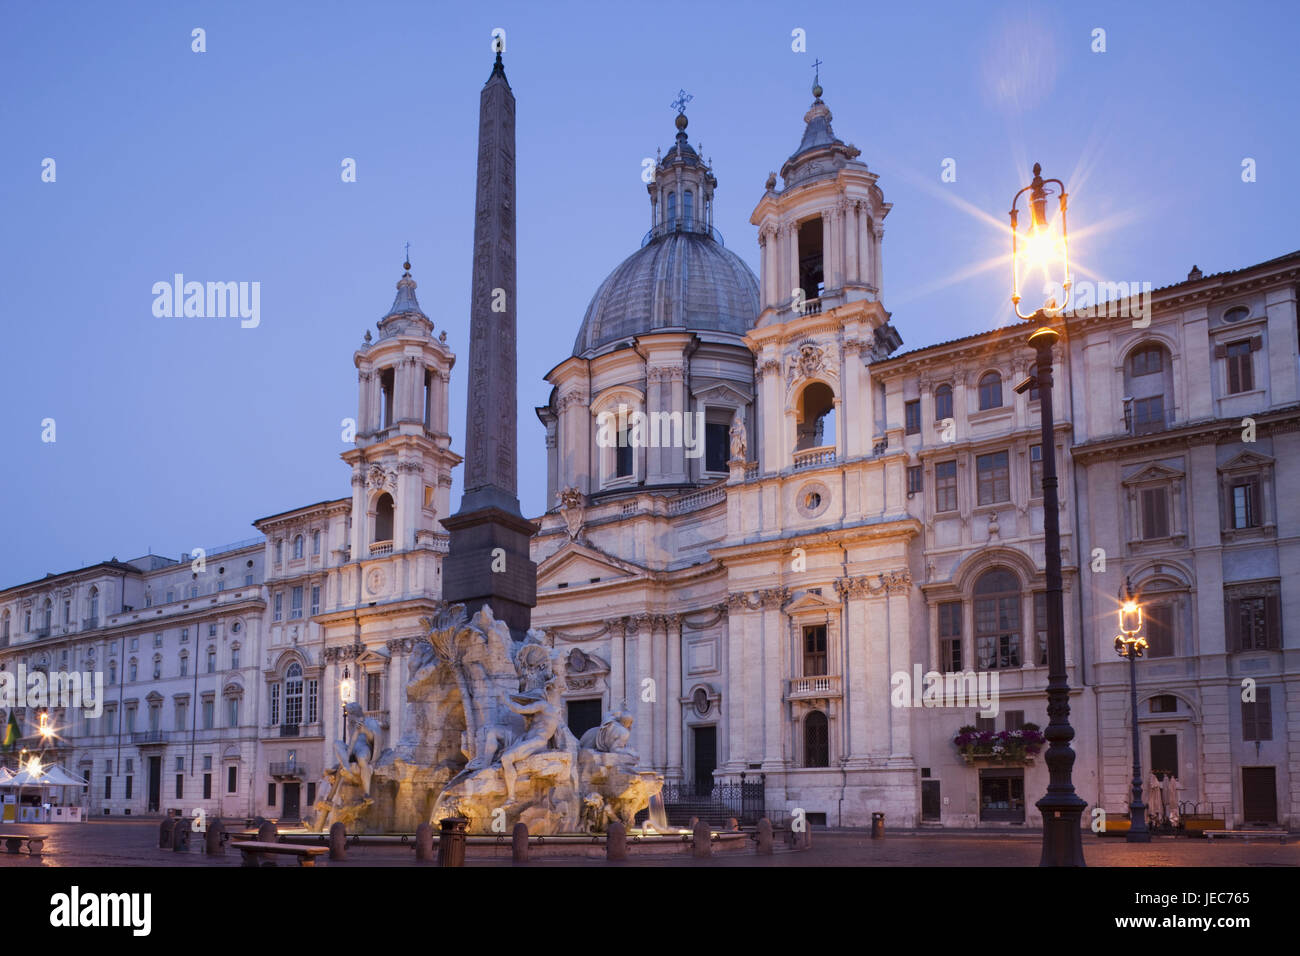 Italy, Rome, Piazza Navona, four-current well and church Sant Æ Agnese in Agone, in the evening, Stock Photo